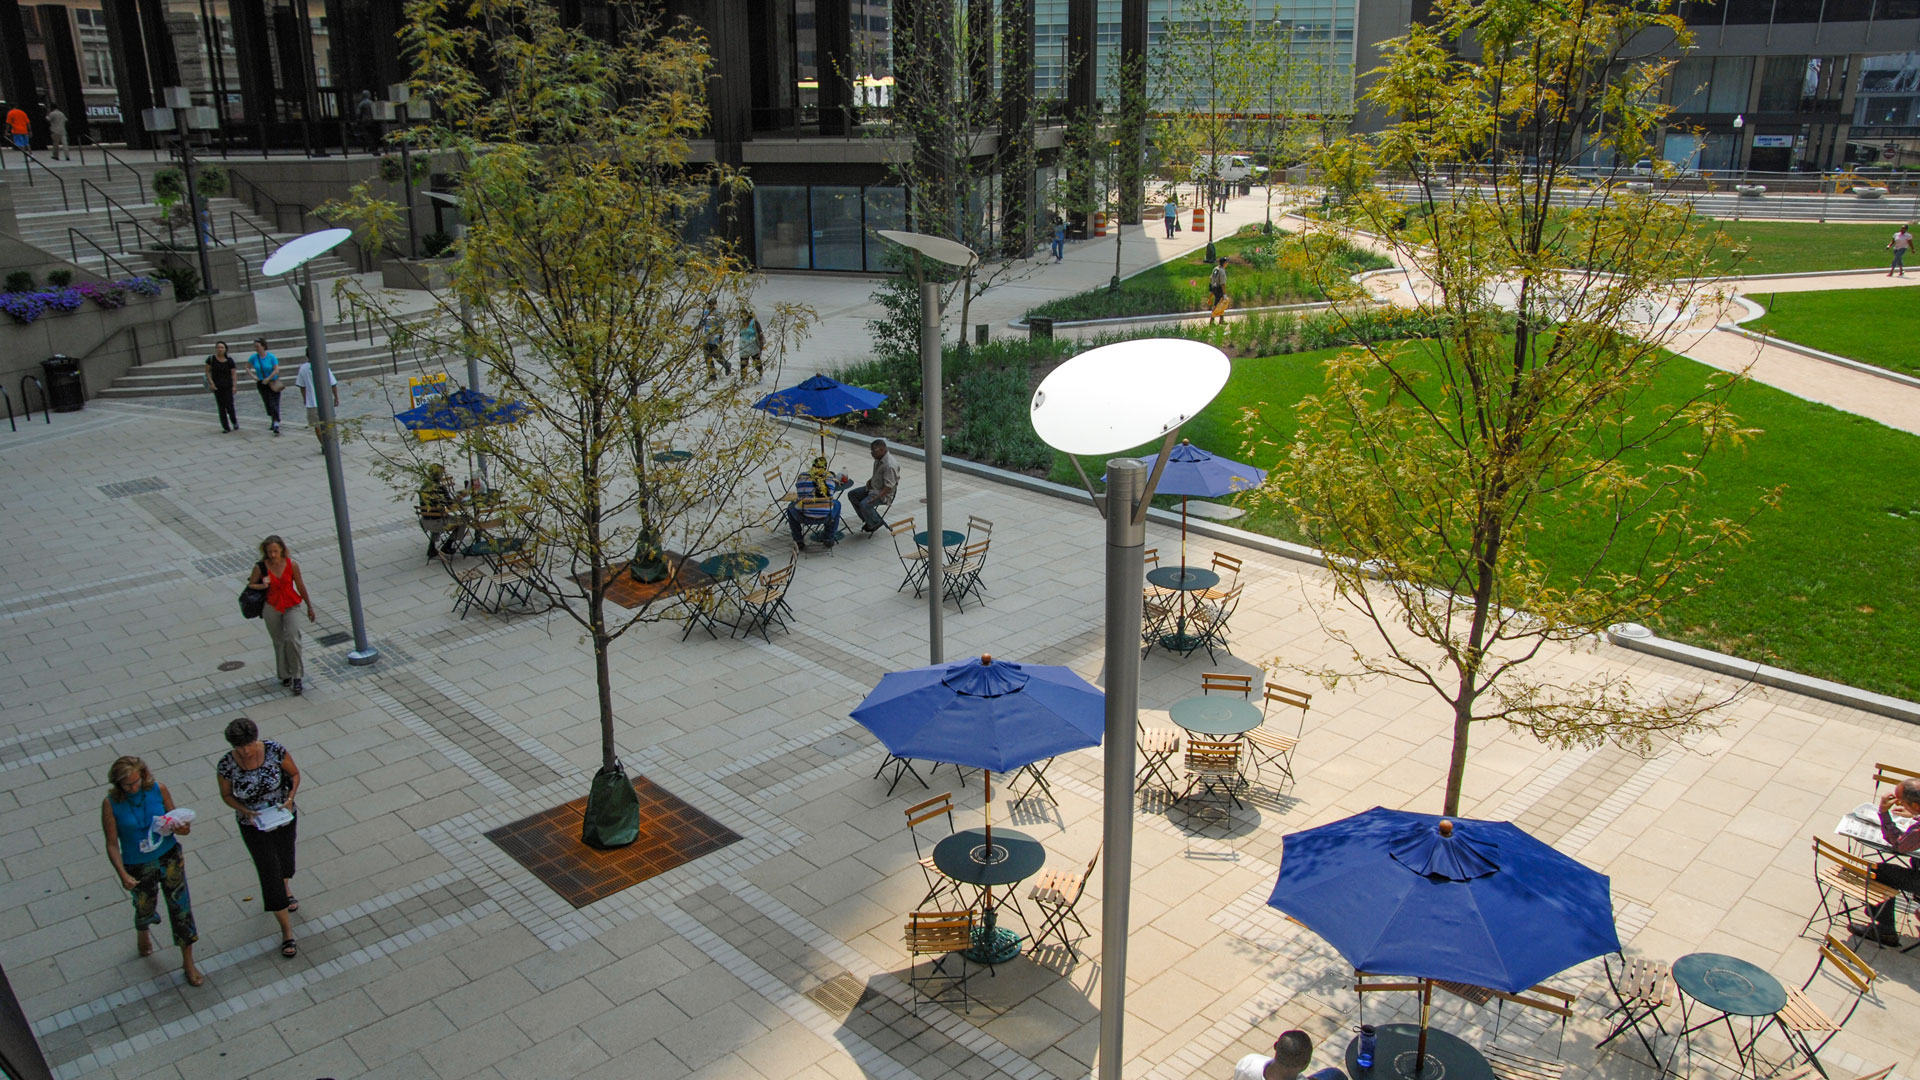 Overhead view of Downtown Baltimore's Center Plaza, featuring green grass, pathways, bistro tables, umbrellas, and walking pedestrians.